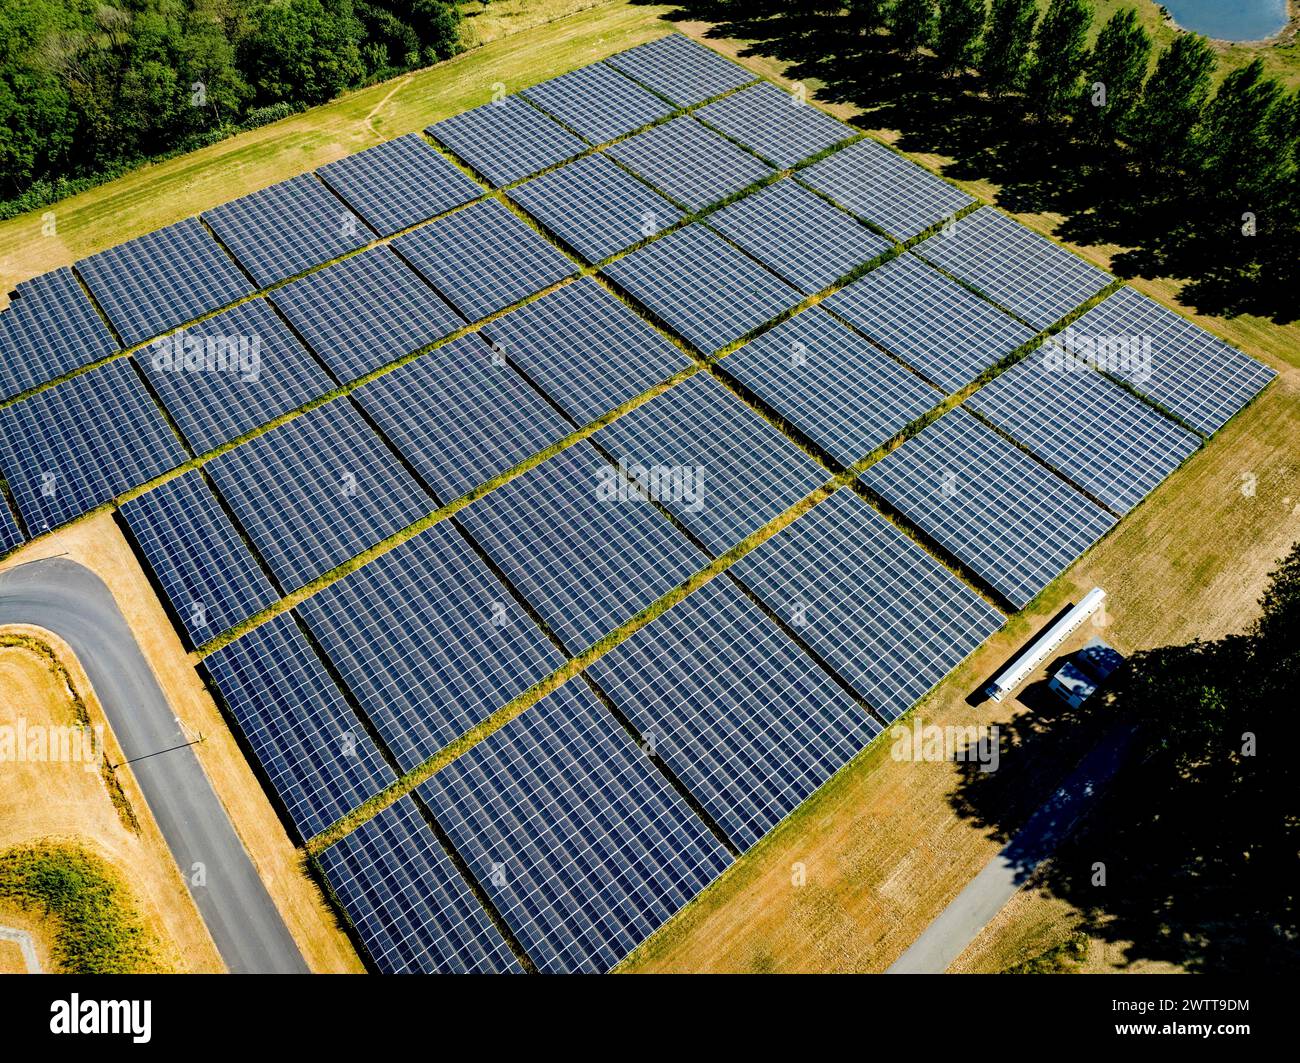 Aerial view of expansive solar farm soaking up the sun's energy Stock Photo